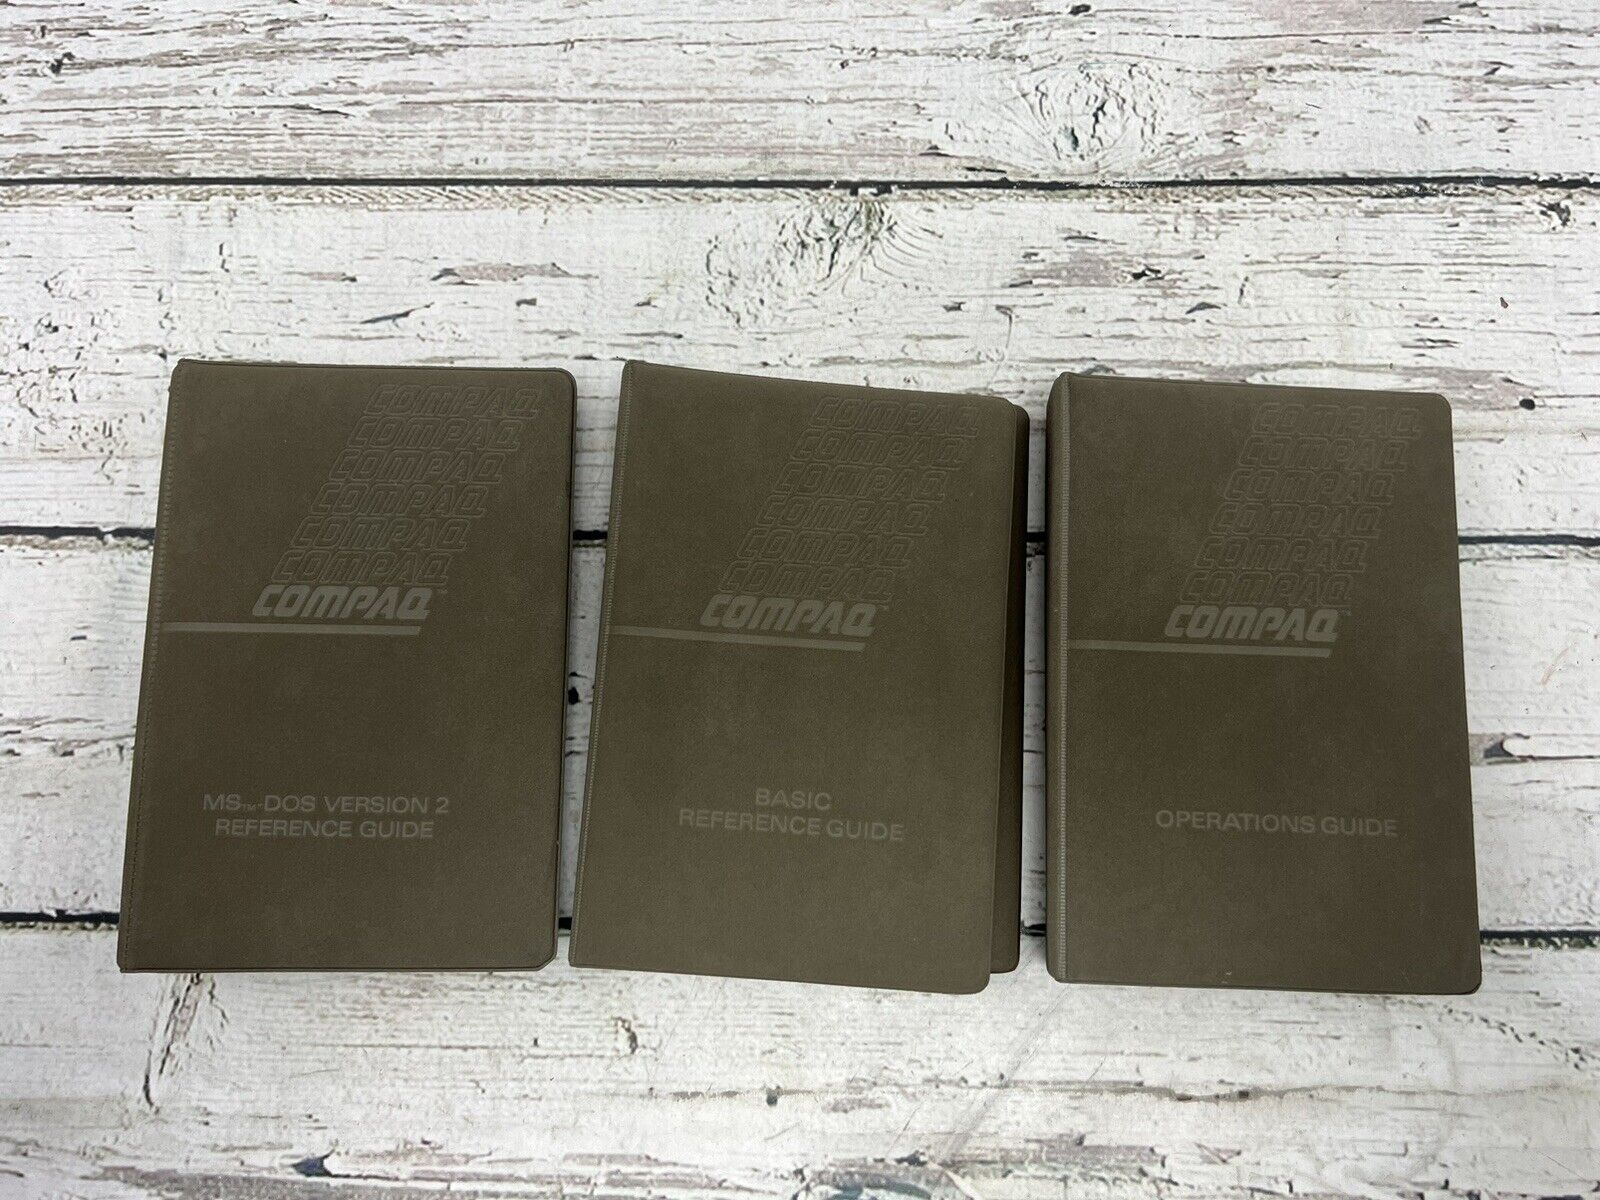 VTG 1984 Compaq Operations Manual Basic Reference Guides 1 & 2 Books - Lot (3)